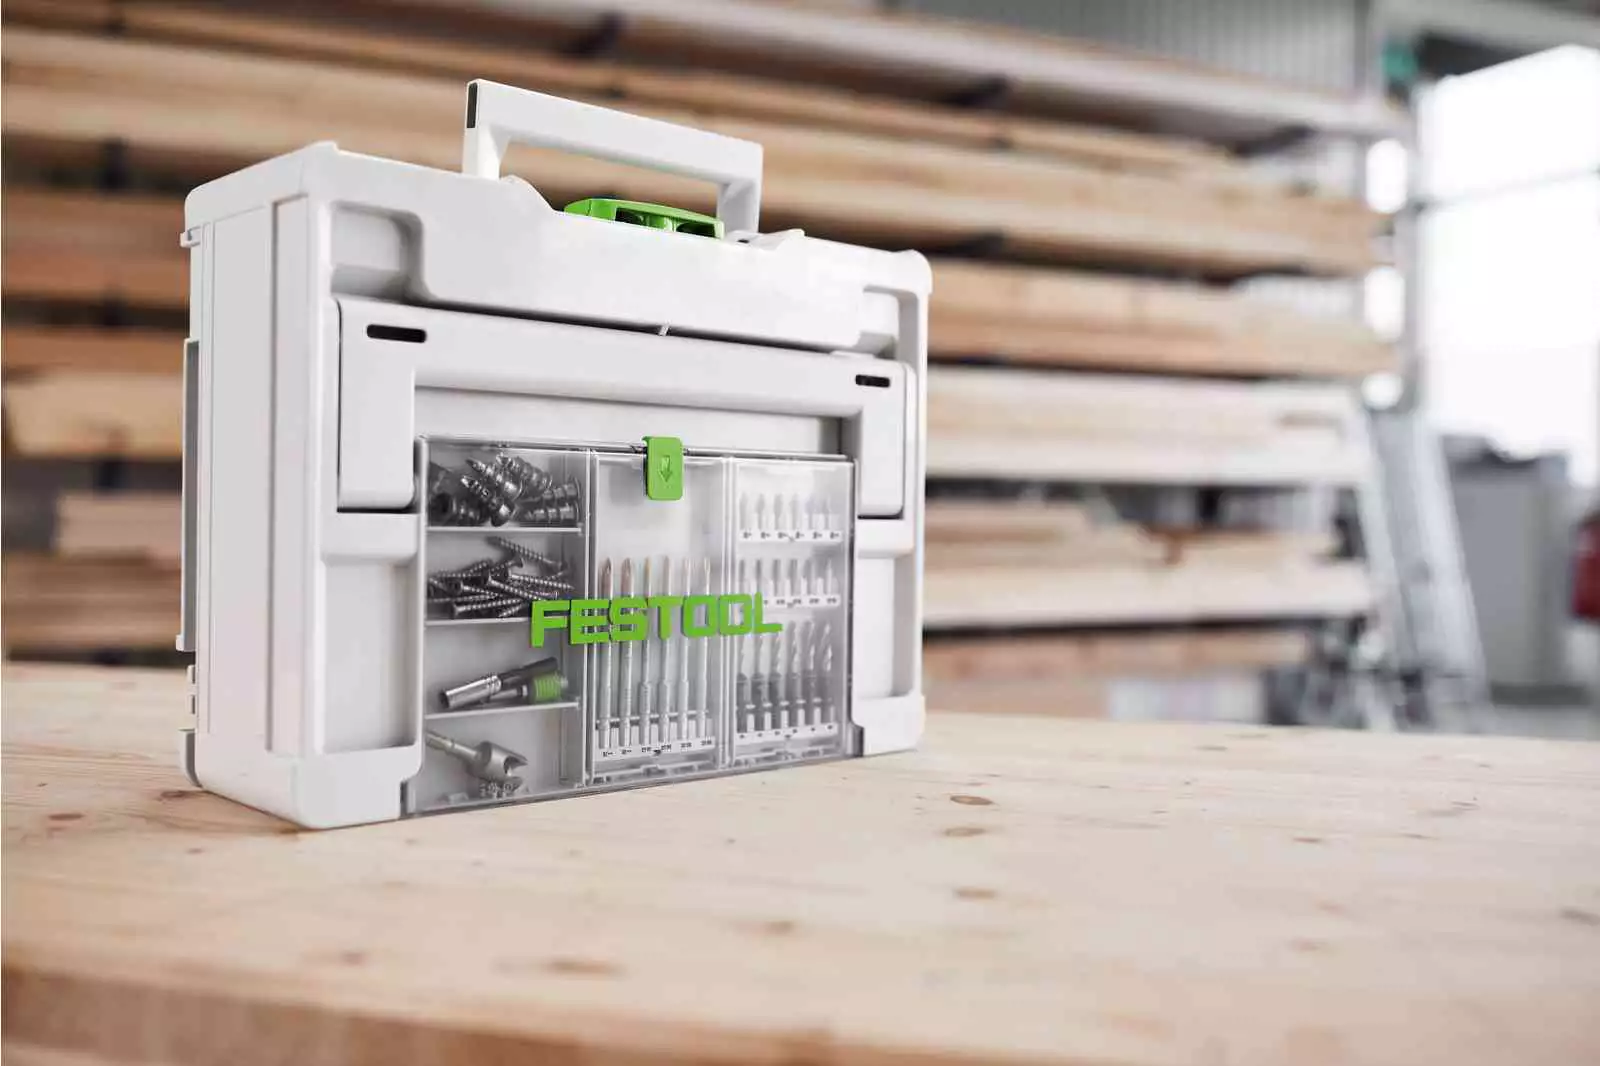 Festool Systainer 3 Lid Department upgrade